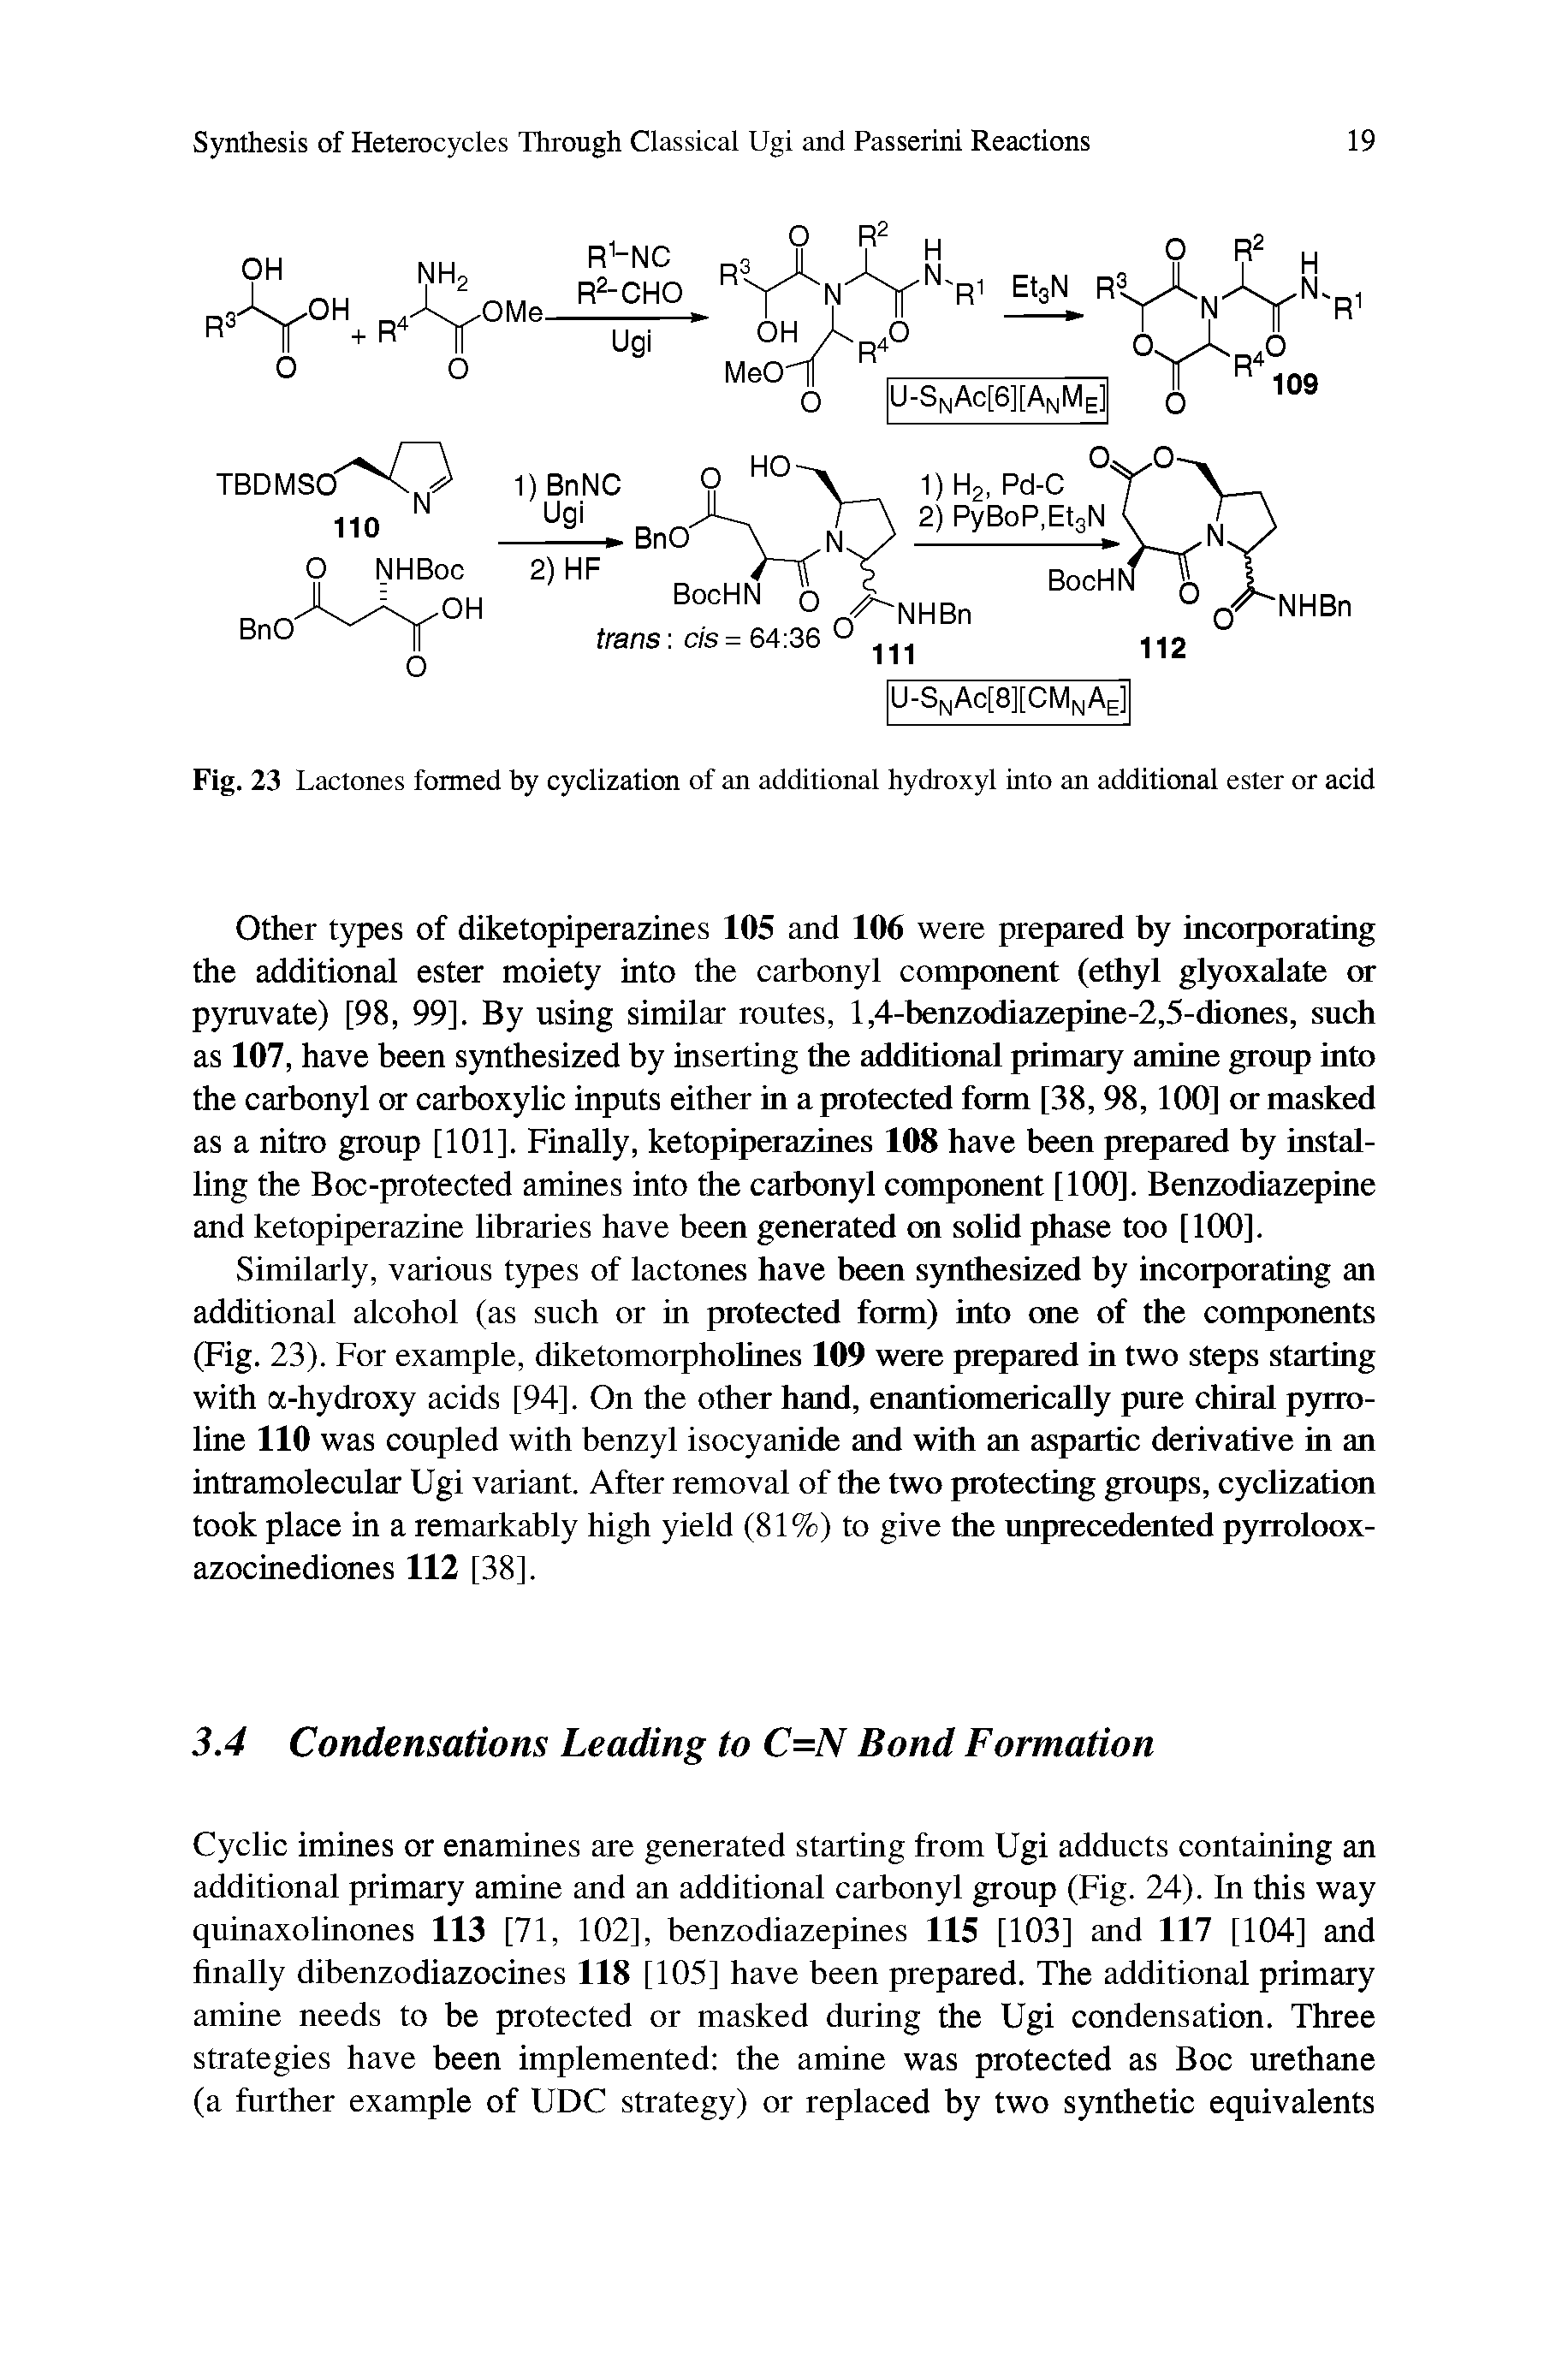 Fig. 23 Lactones formed by cyclization of an additional hydroxyl into an additional ester or acid...